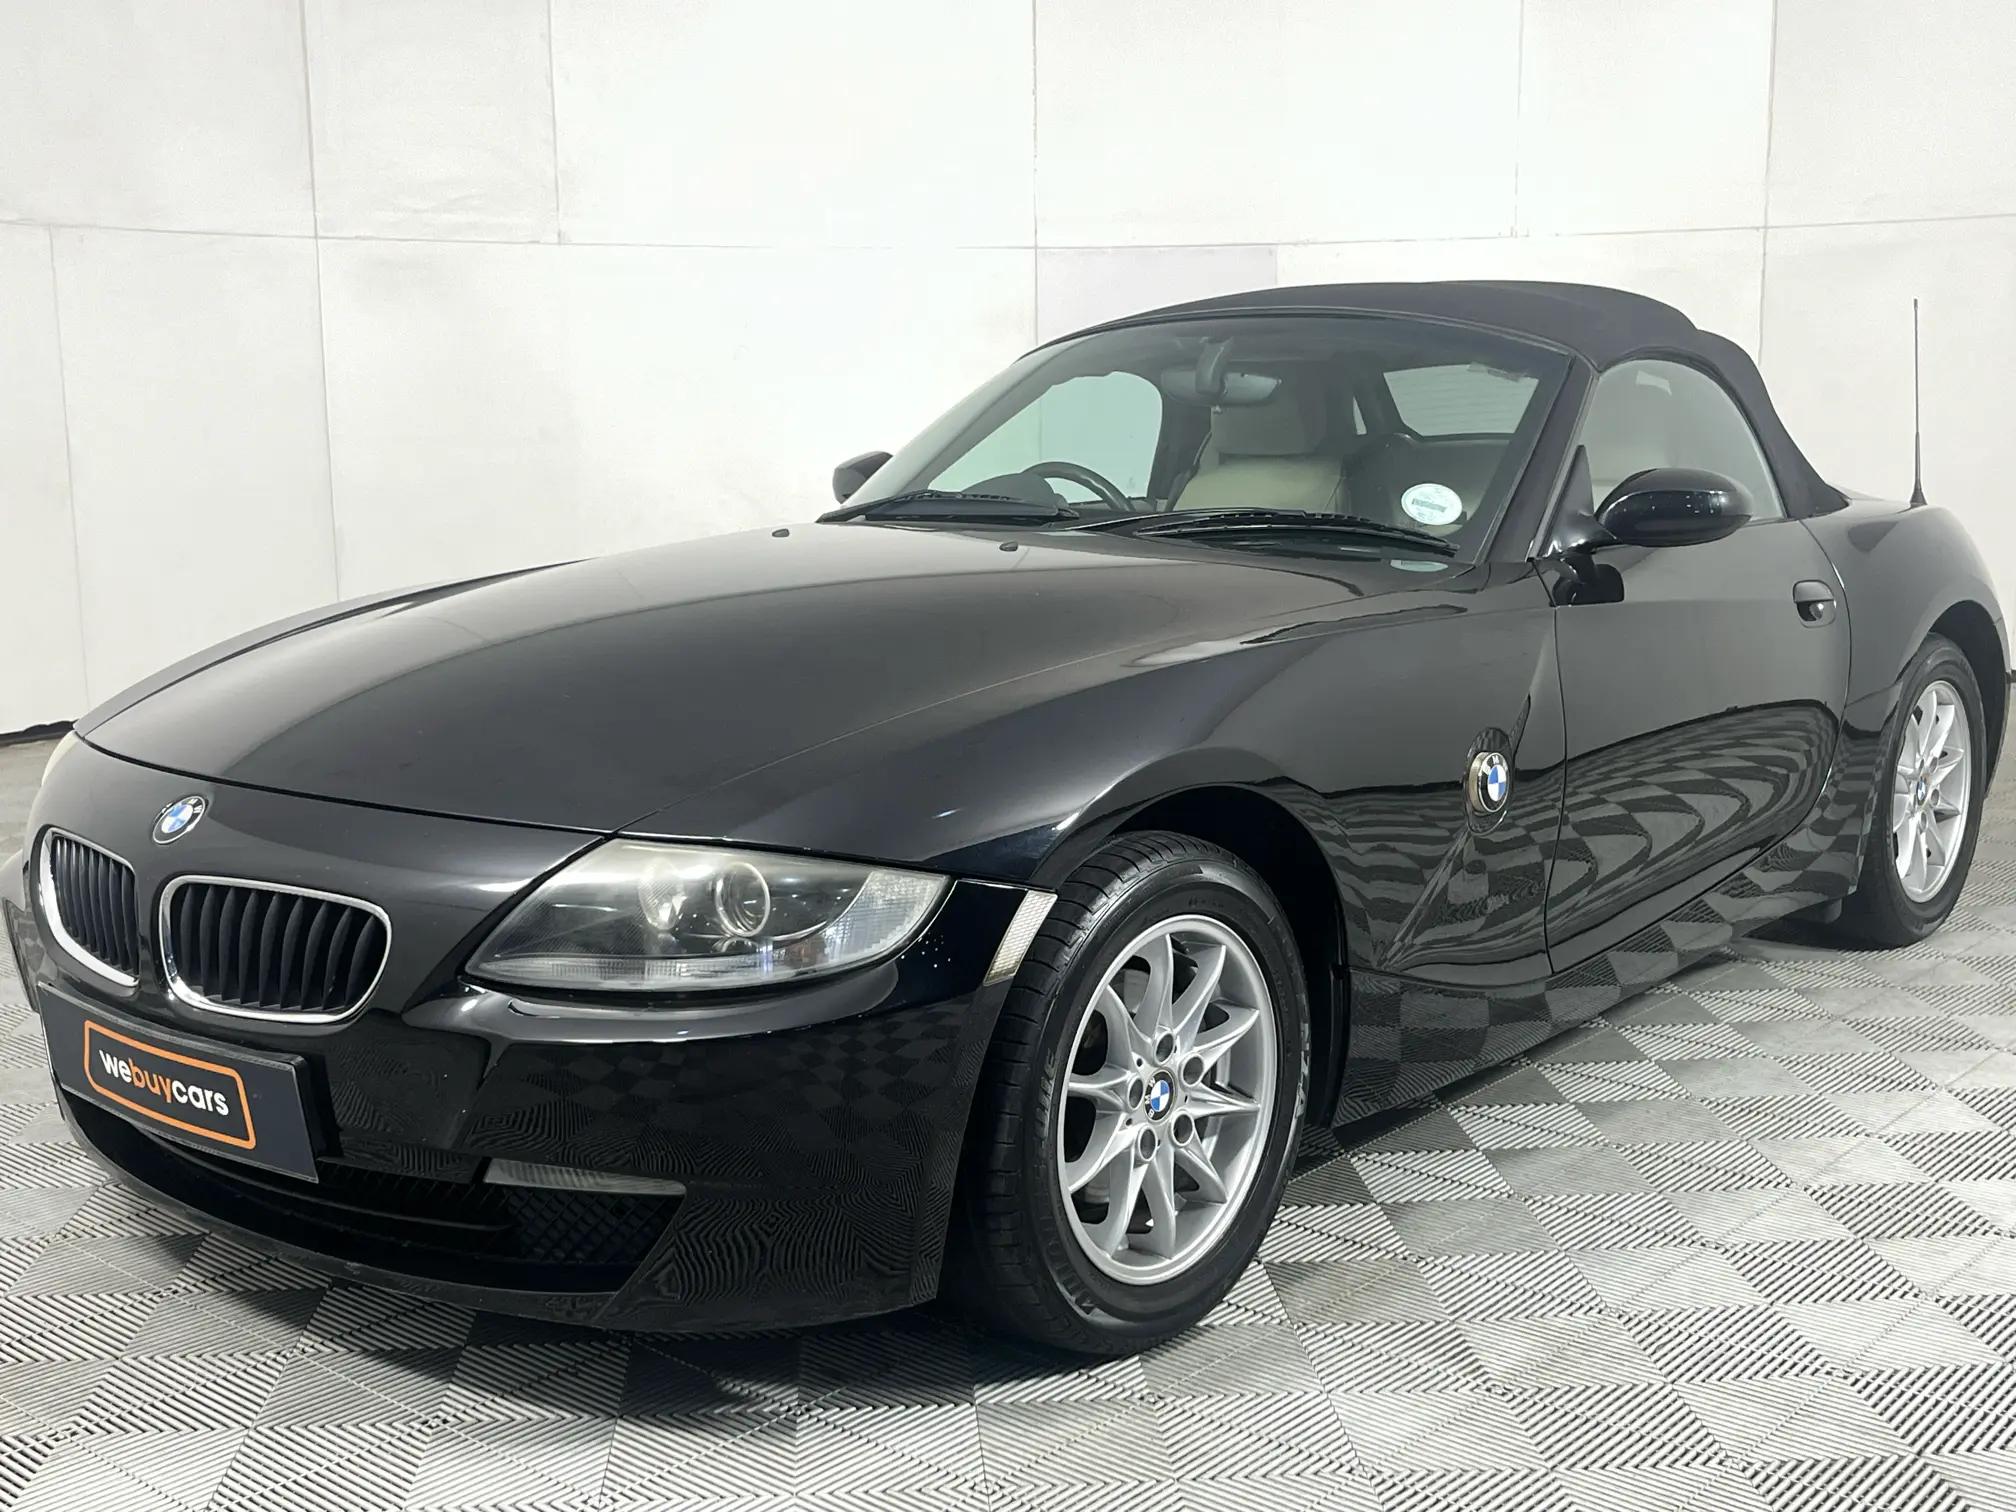 BMW Z4 (E85) 2.0i Roadster Exclusive